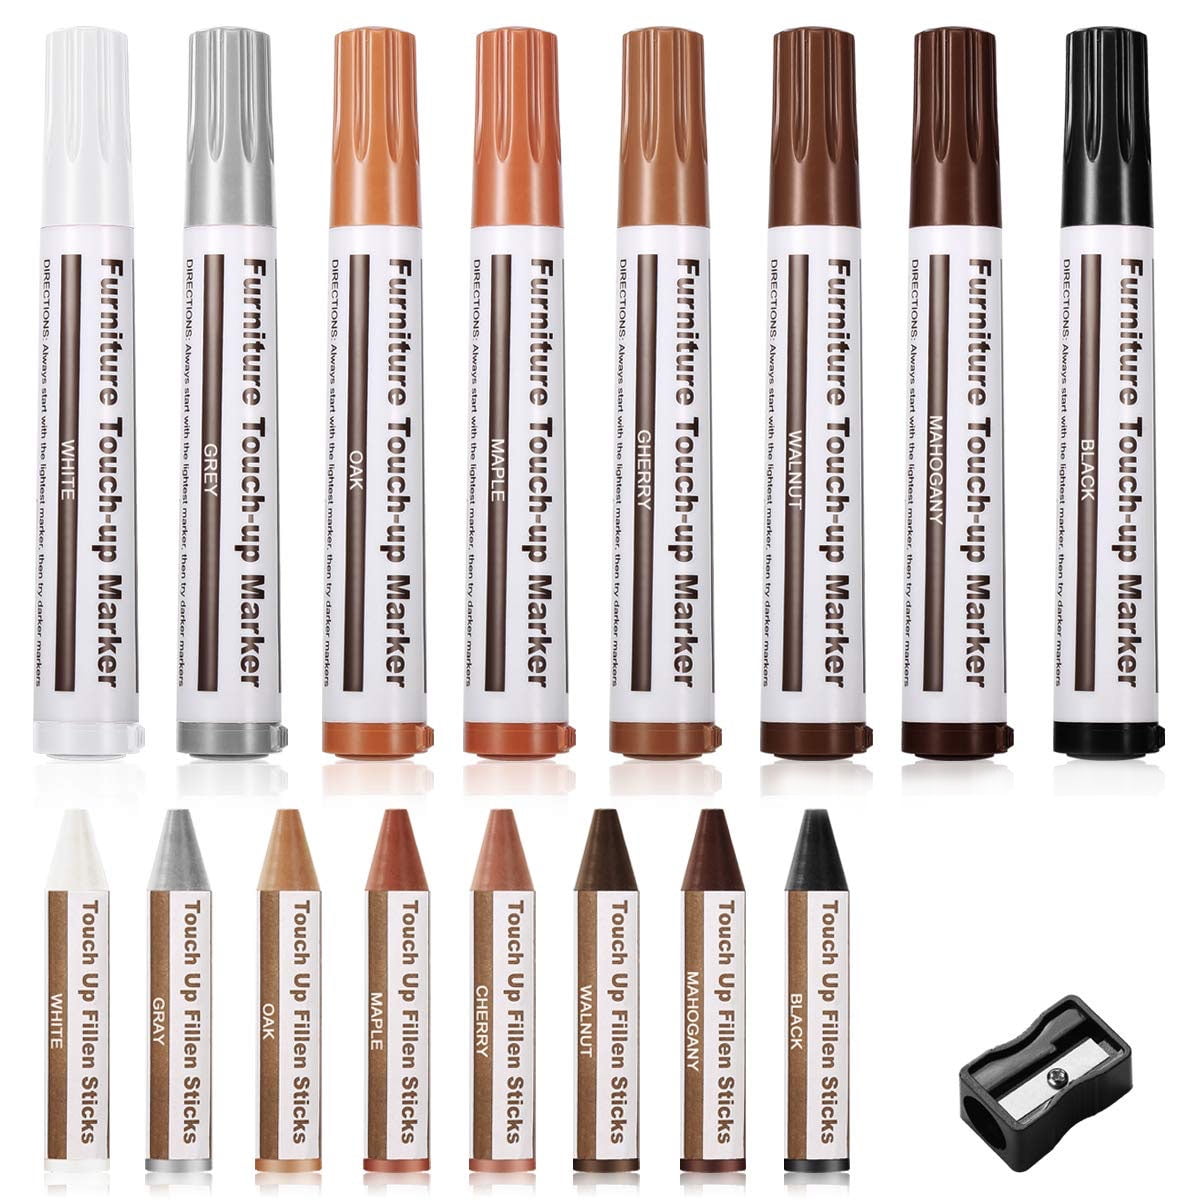 New Upgrade Furniture Pens for Touch Up, 12 Colors Wood Scratch Repair  Markers, Professional Repair Tools for Stains, Scratches, Wood Floors,  Tables